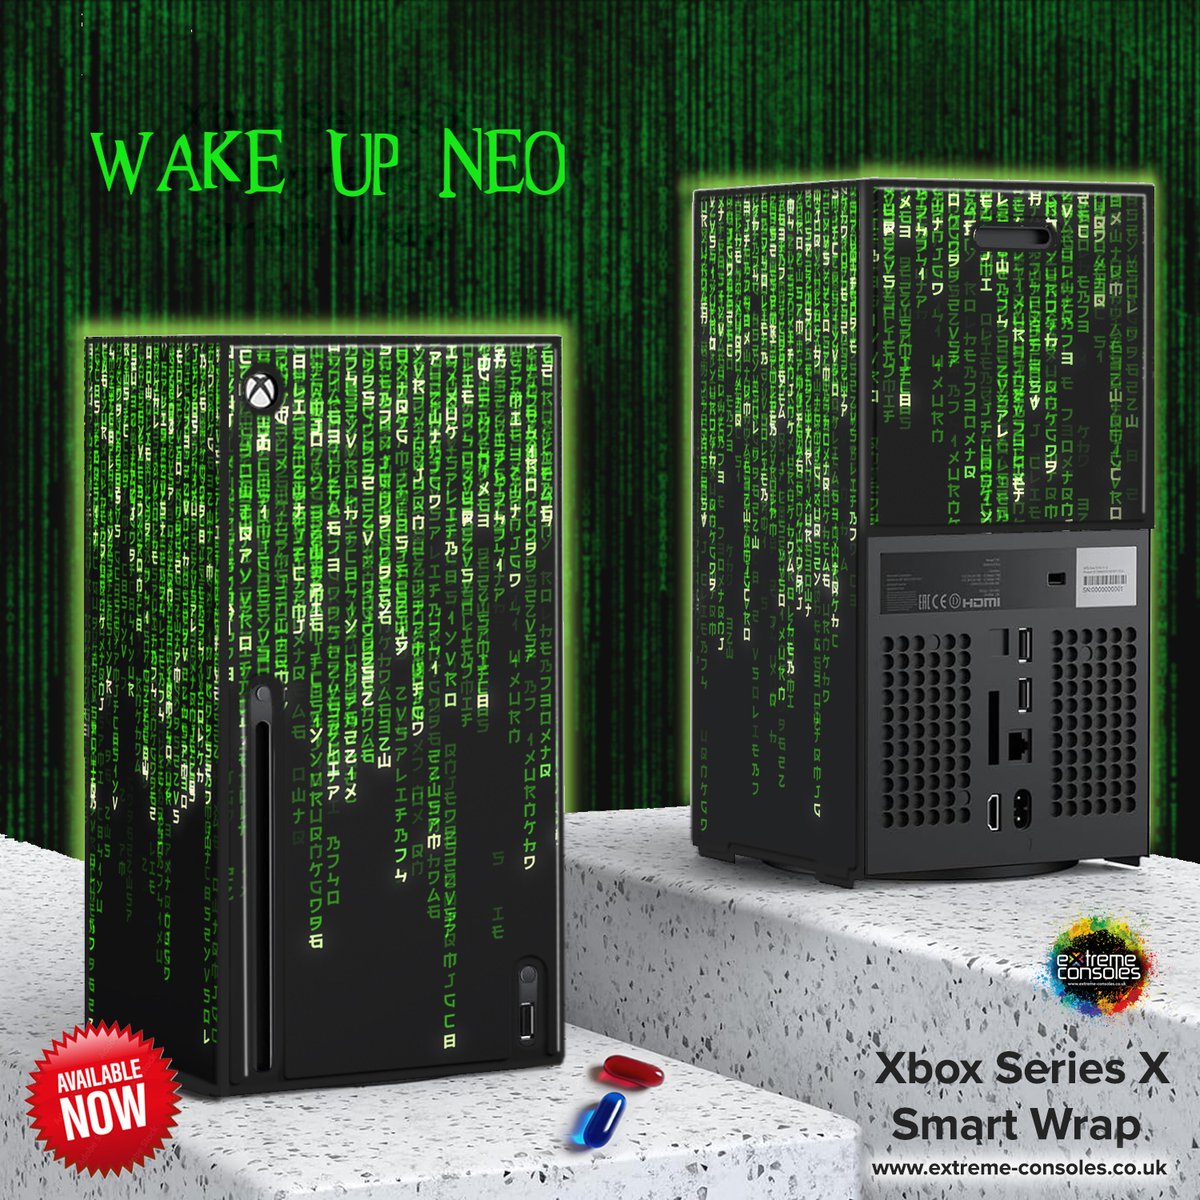 You hear that Mr. Anderson?... That is the sound of inevitability... Digital Rain Xbox Series X smart wrap available now - bit.ly/3Nk5XX6 #Xbox #gaming #Matrix